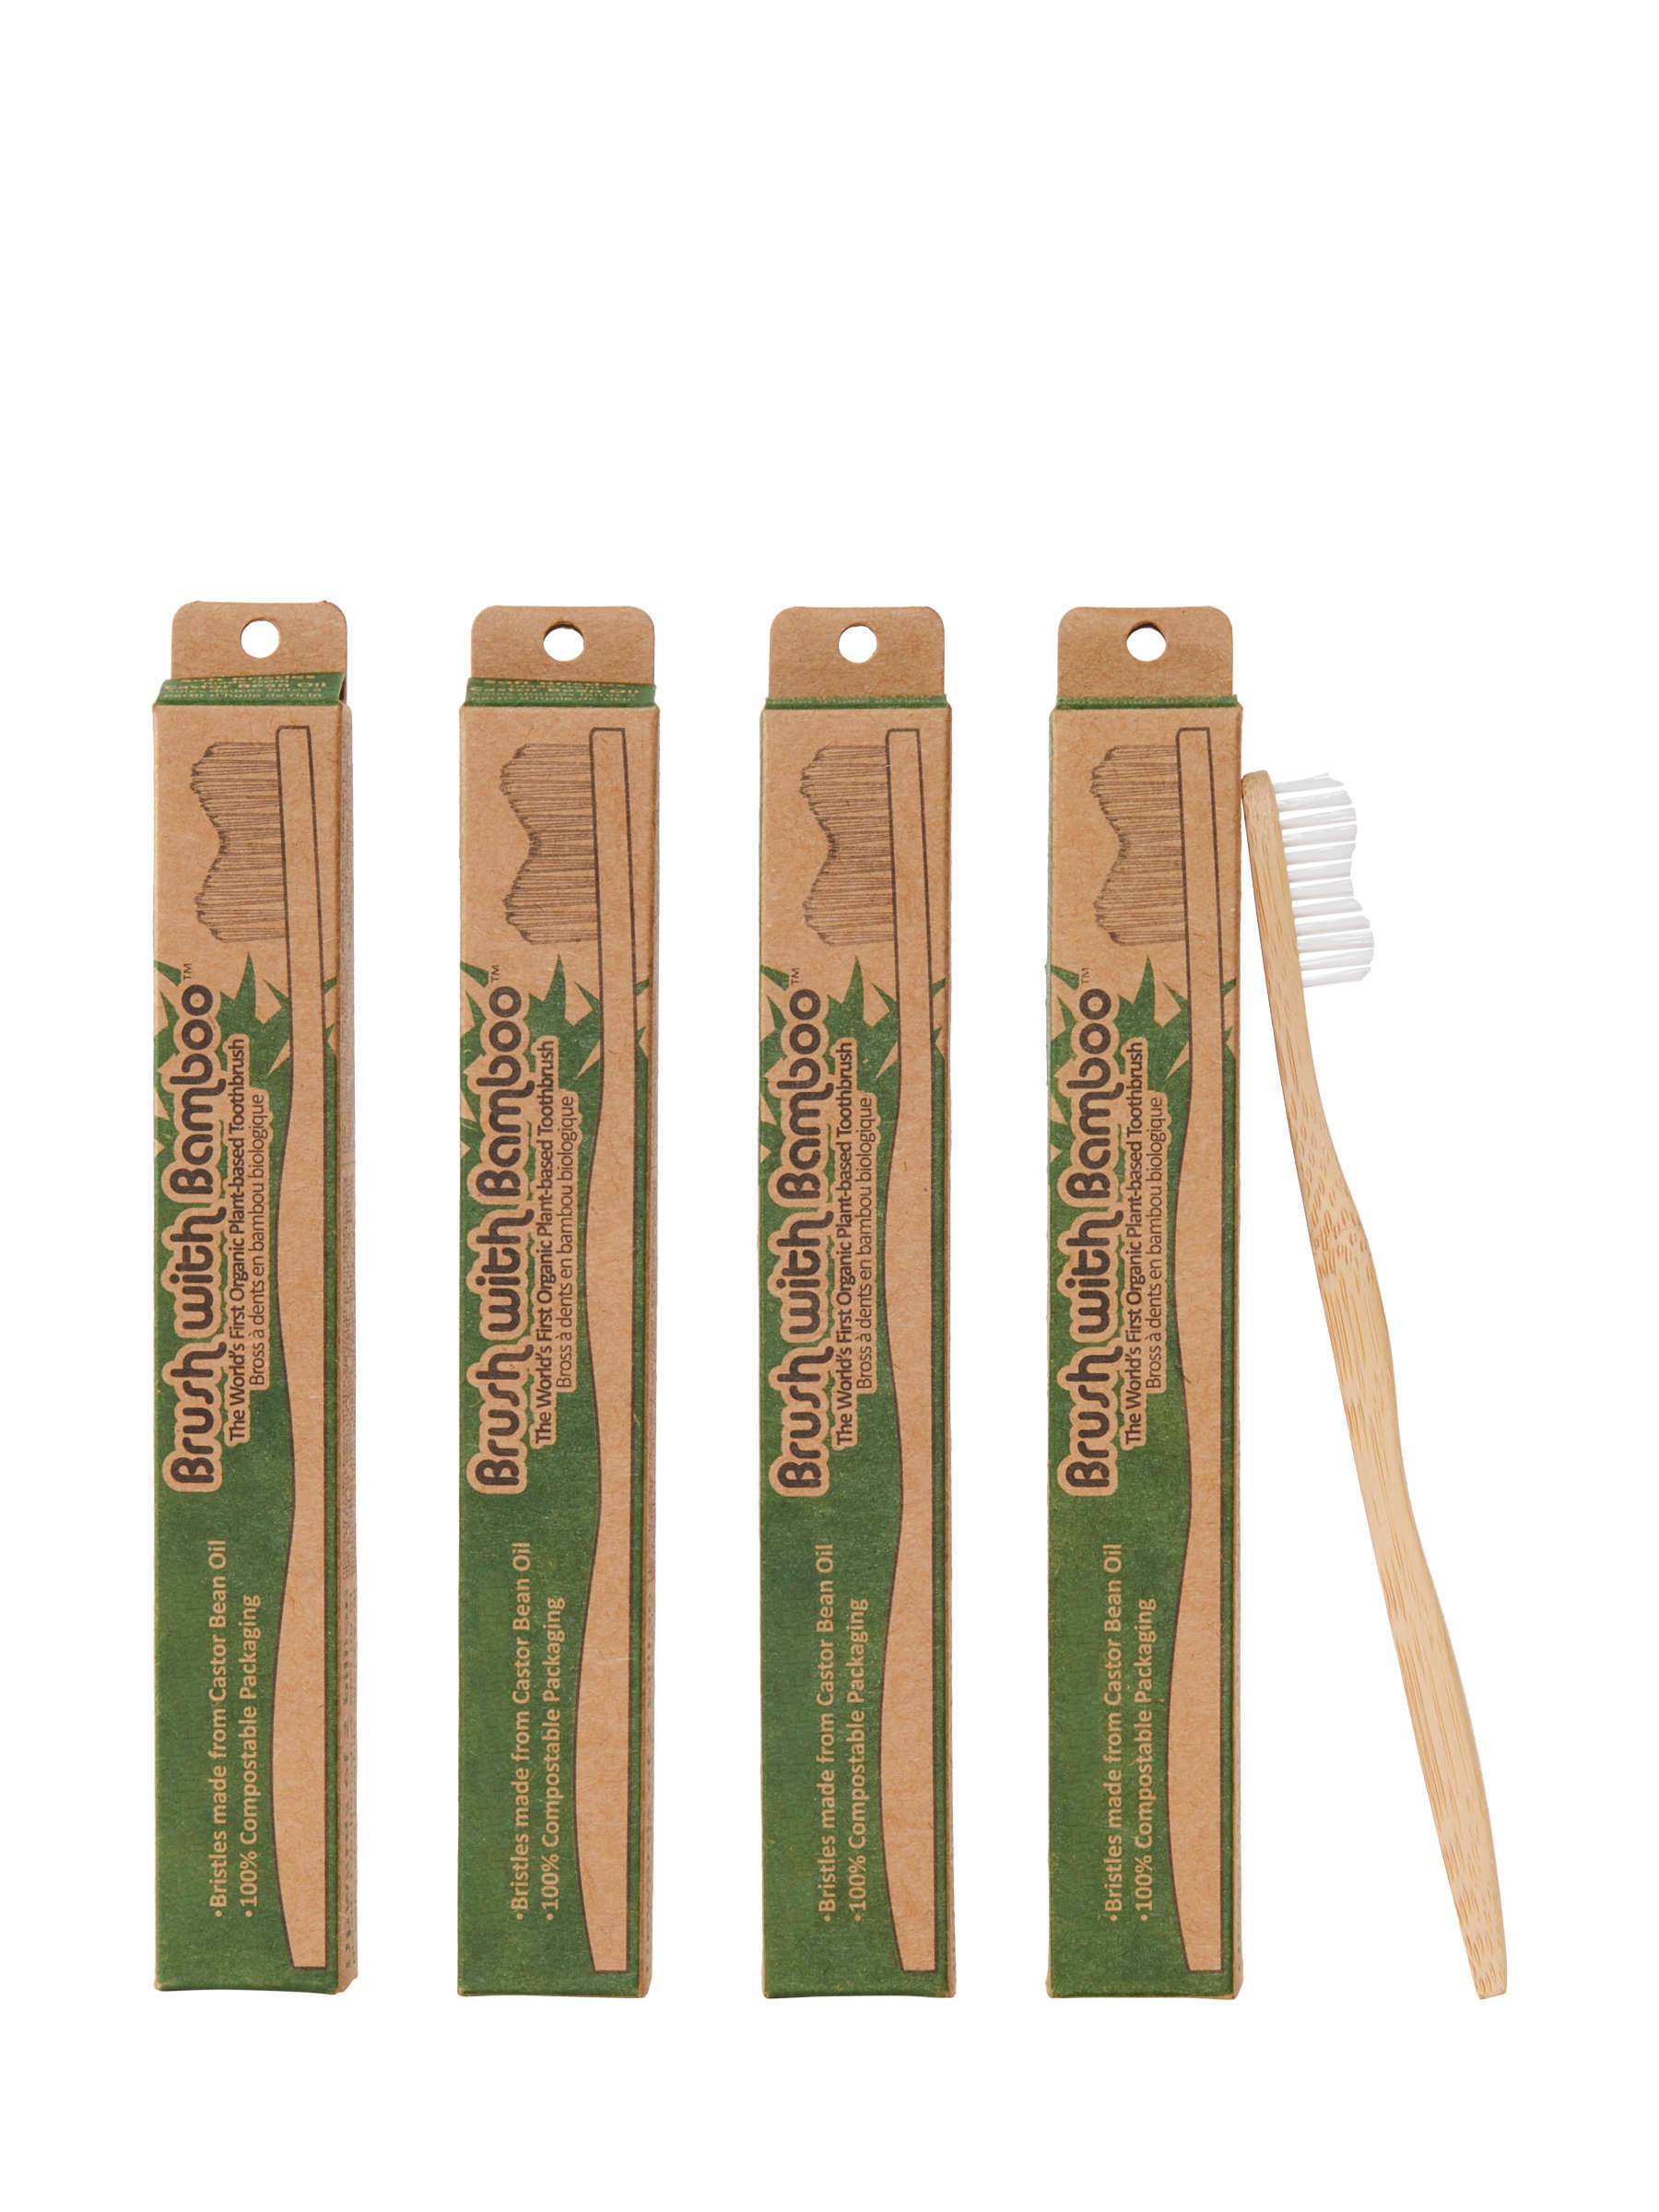 4 pack of bamboo toothbrushes by Brush with Bamboo